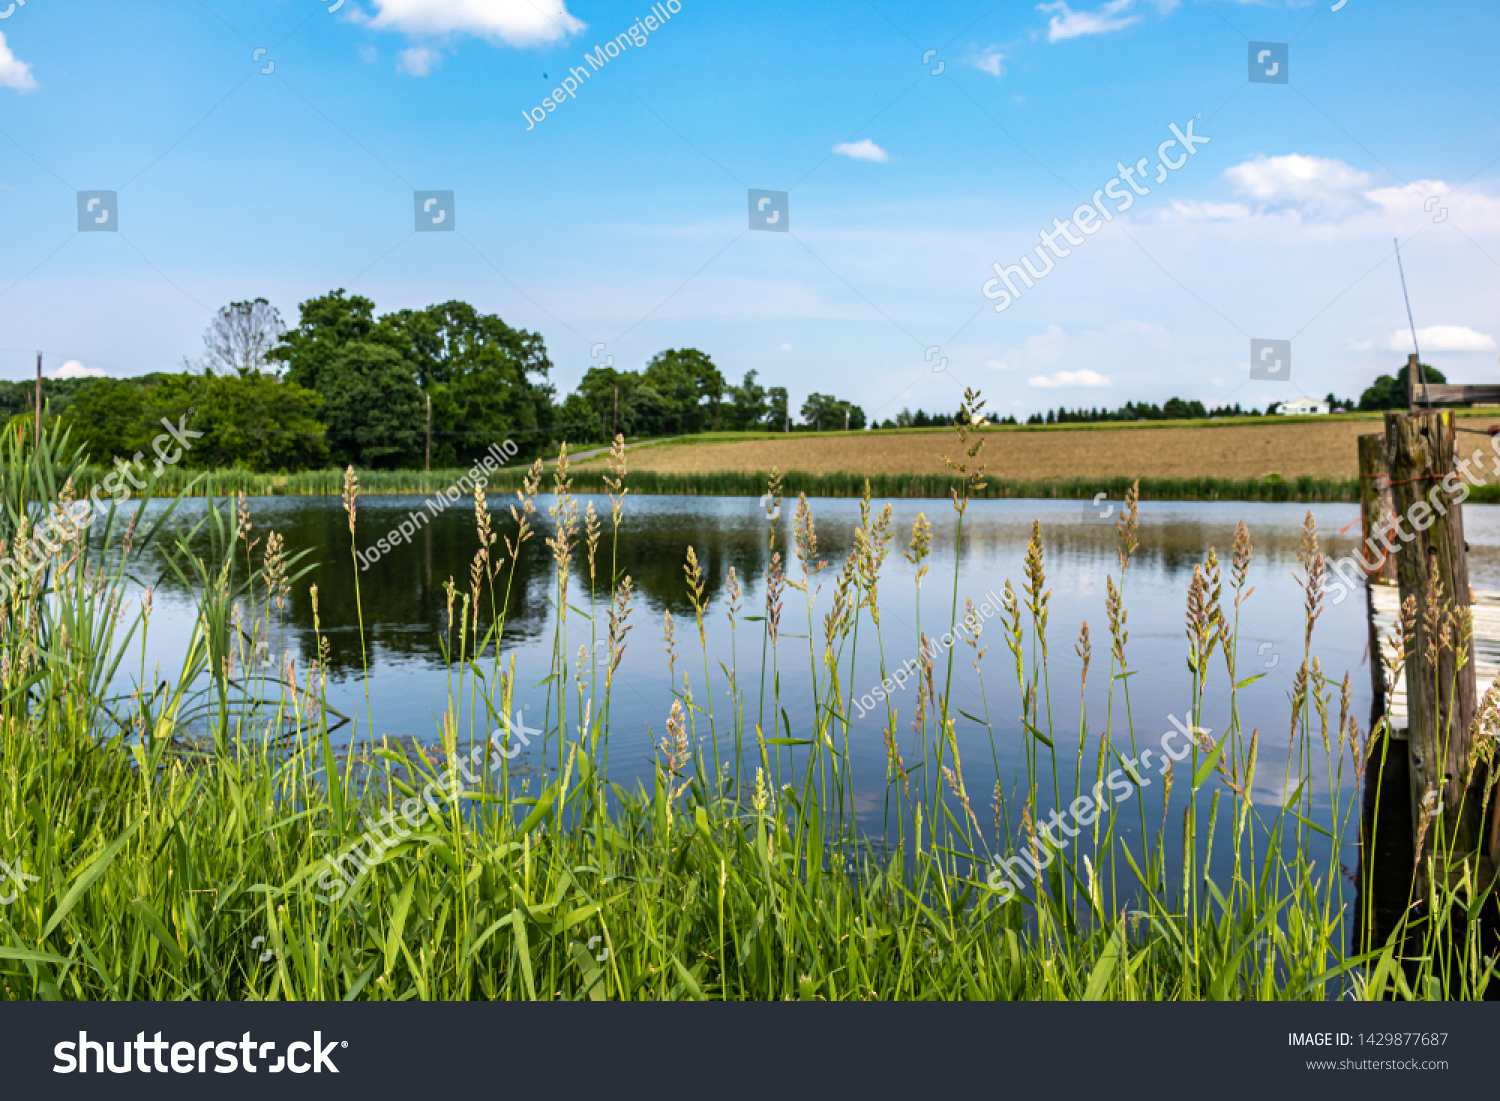 Pond with High Grass and an empty field. Empty field from a farm which was recently tilled. Sky is blue with some clouds in the sky #1429877687